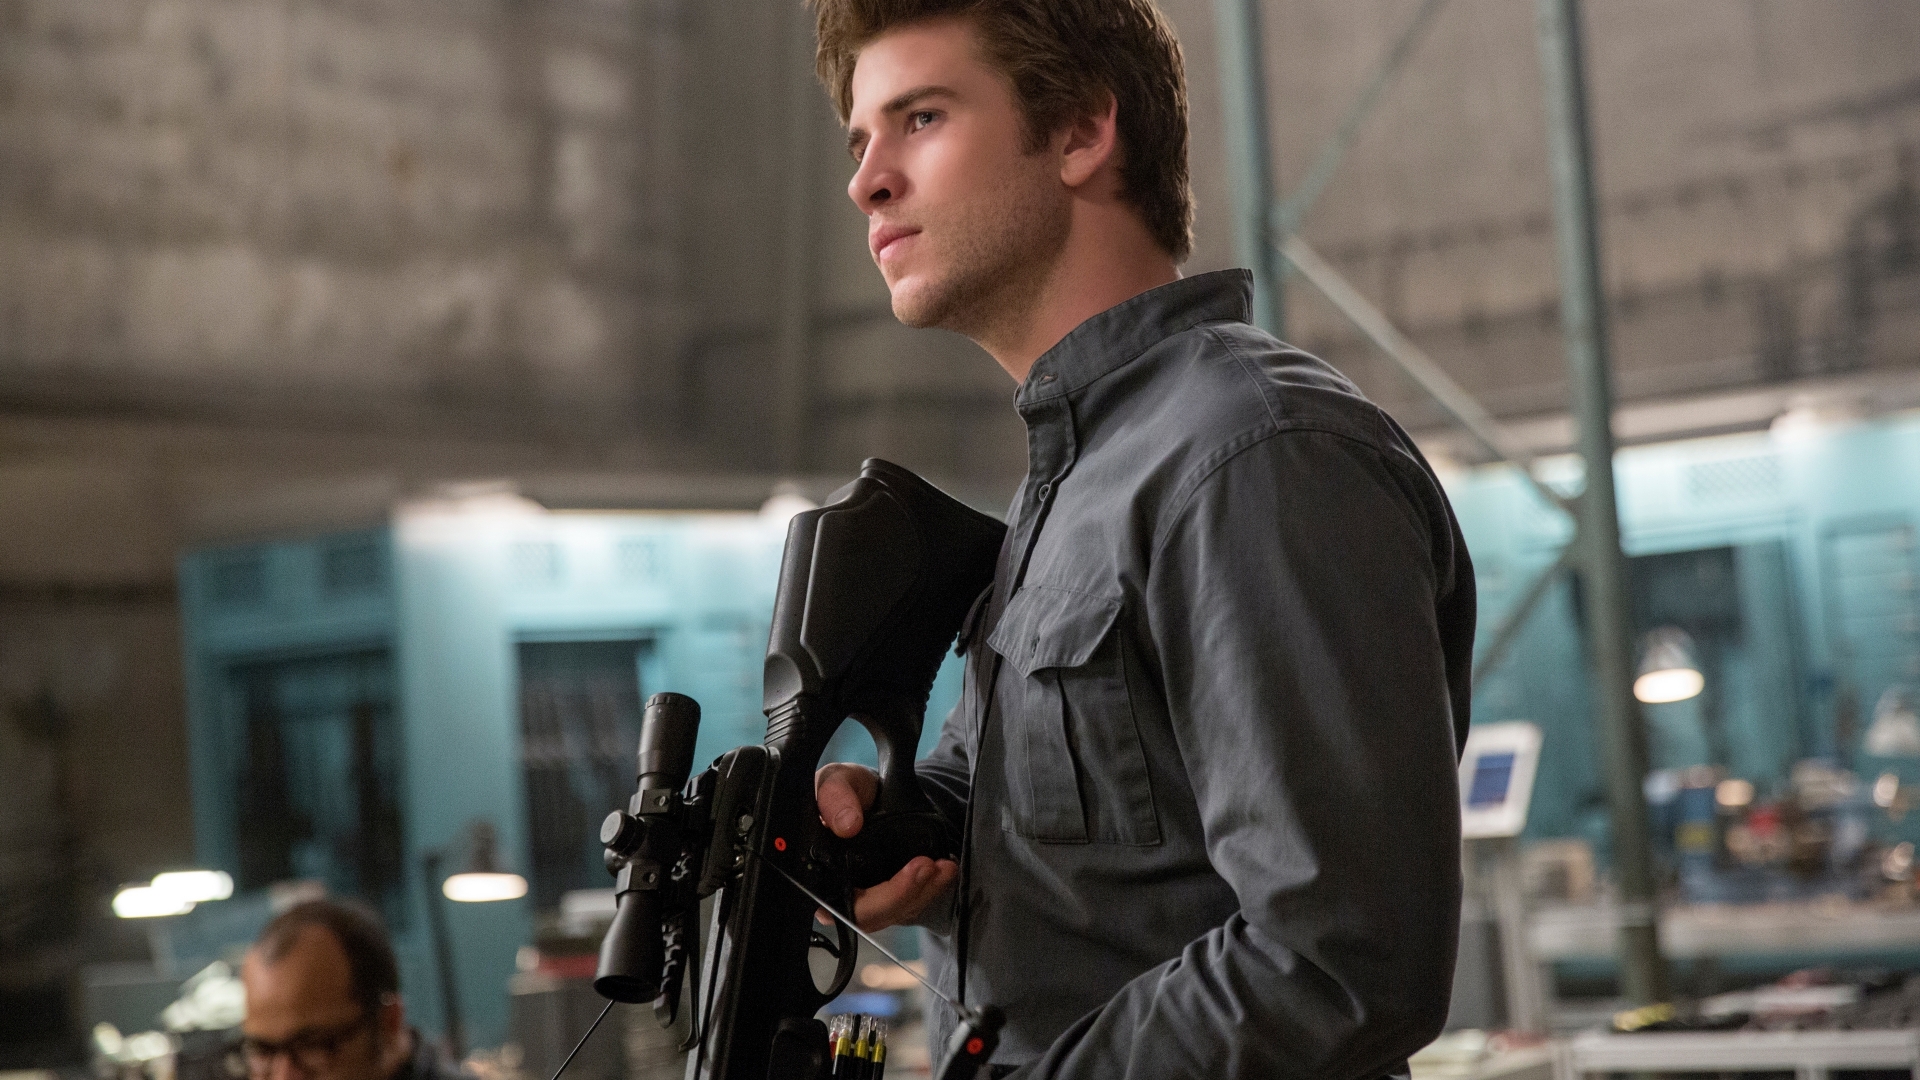 Liam Hemsworth in The Hunger Games for 1920 x 1080 HDTV 1080p resolution